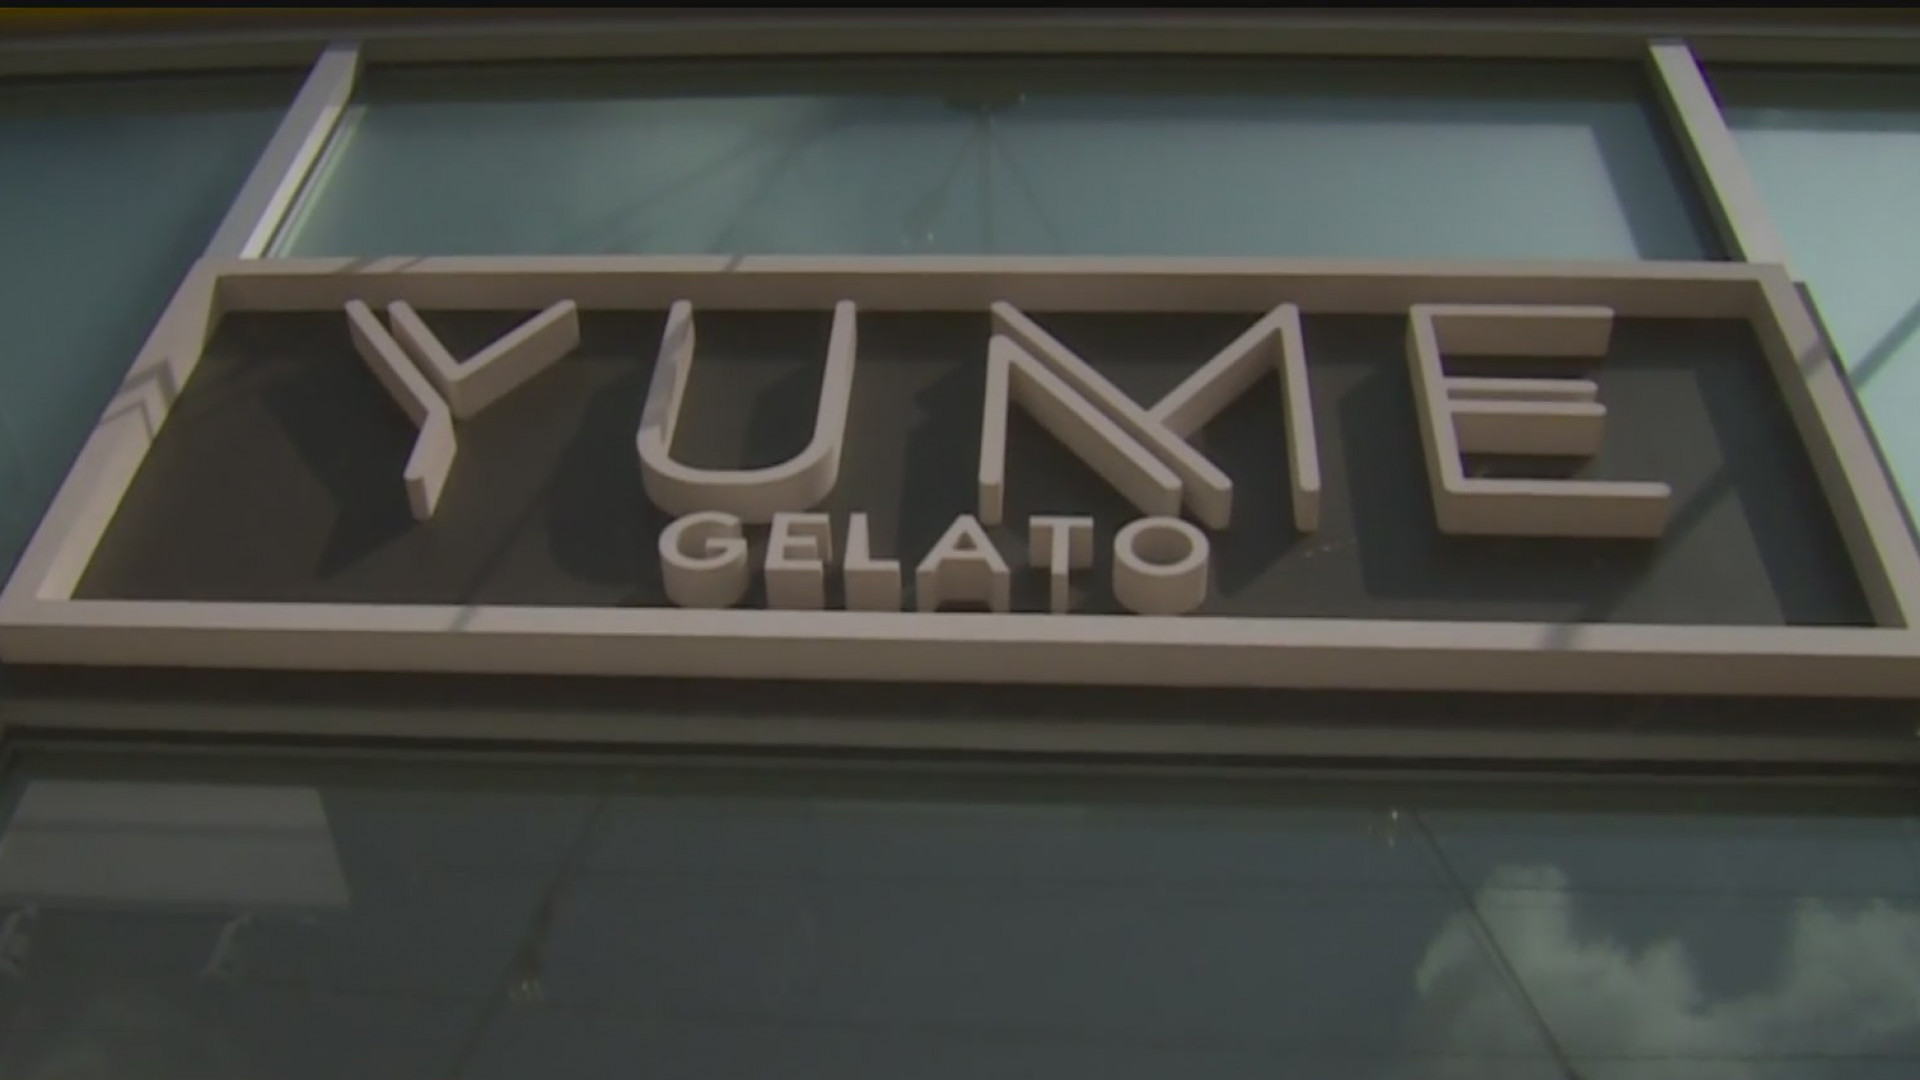 sacramento.cbslocal.com: Asian-Owned Gelato Shop Hit By Vandals, Left With Several Broken Windows